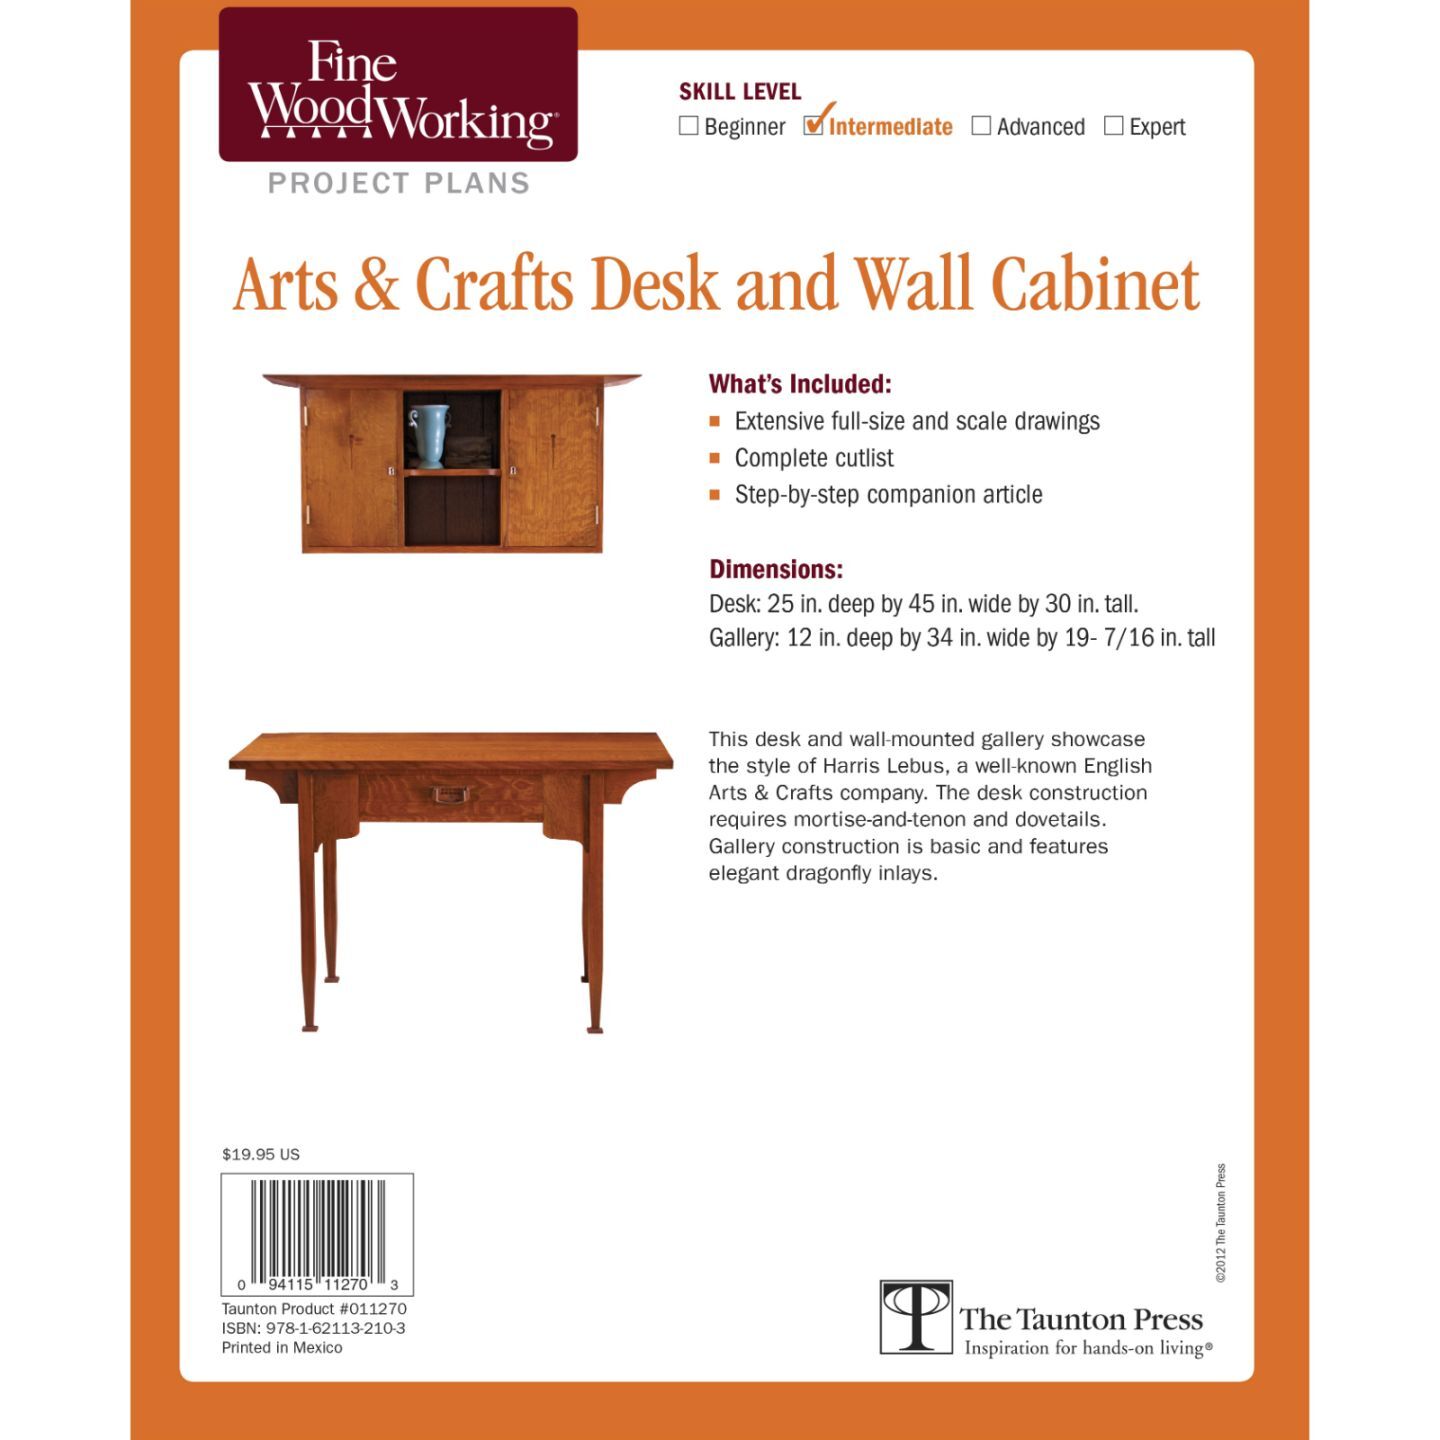 Arts and Crafts Desk and Wall Cabinet Plan